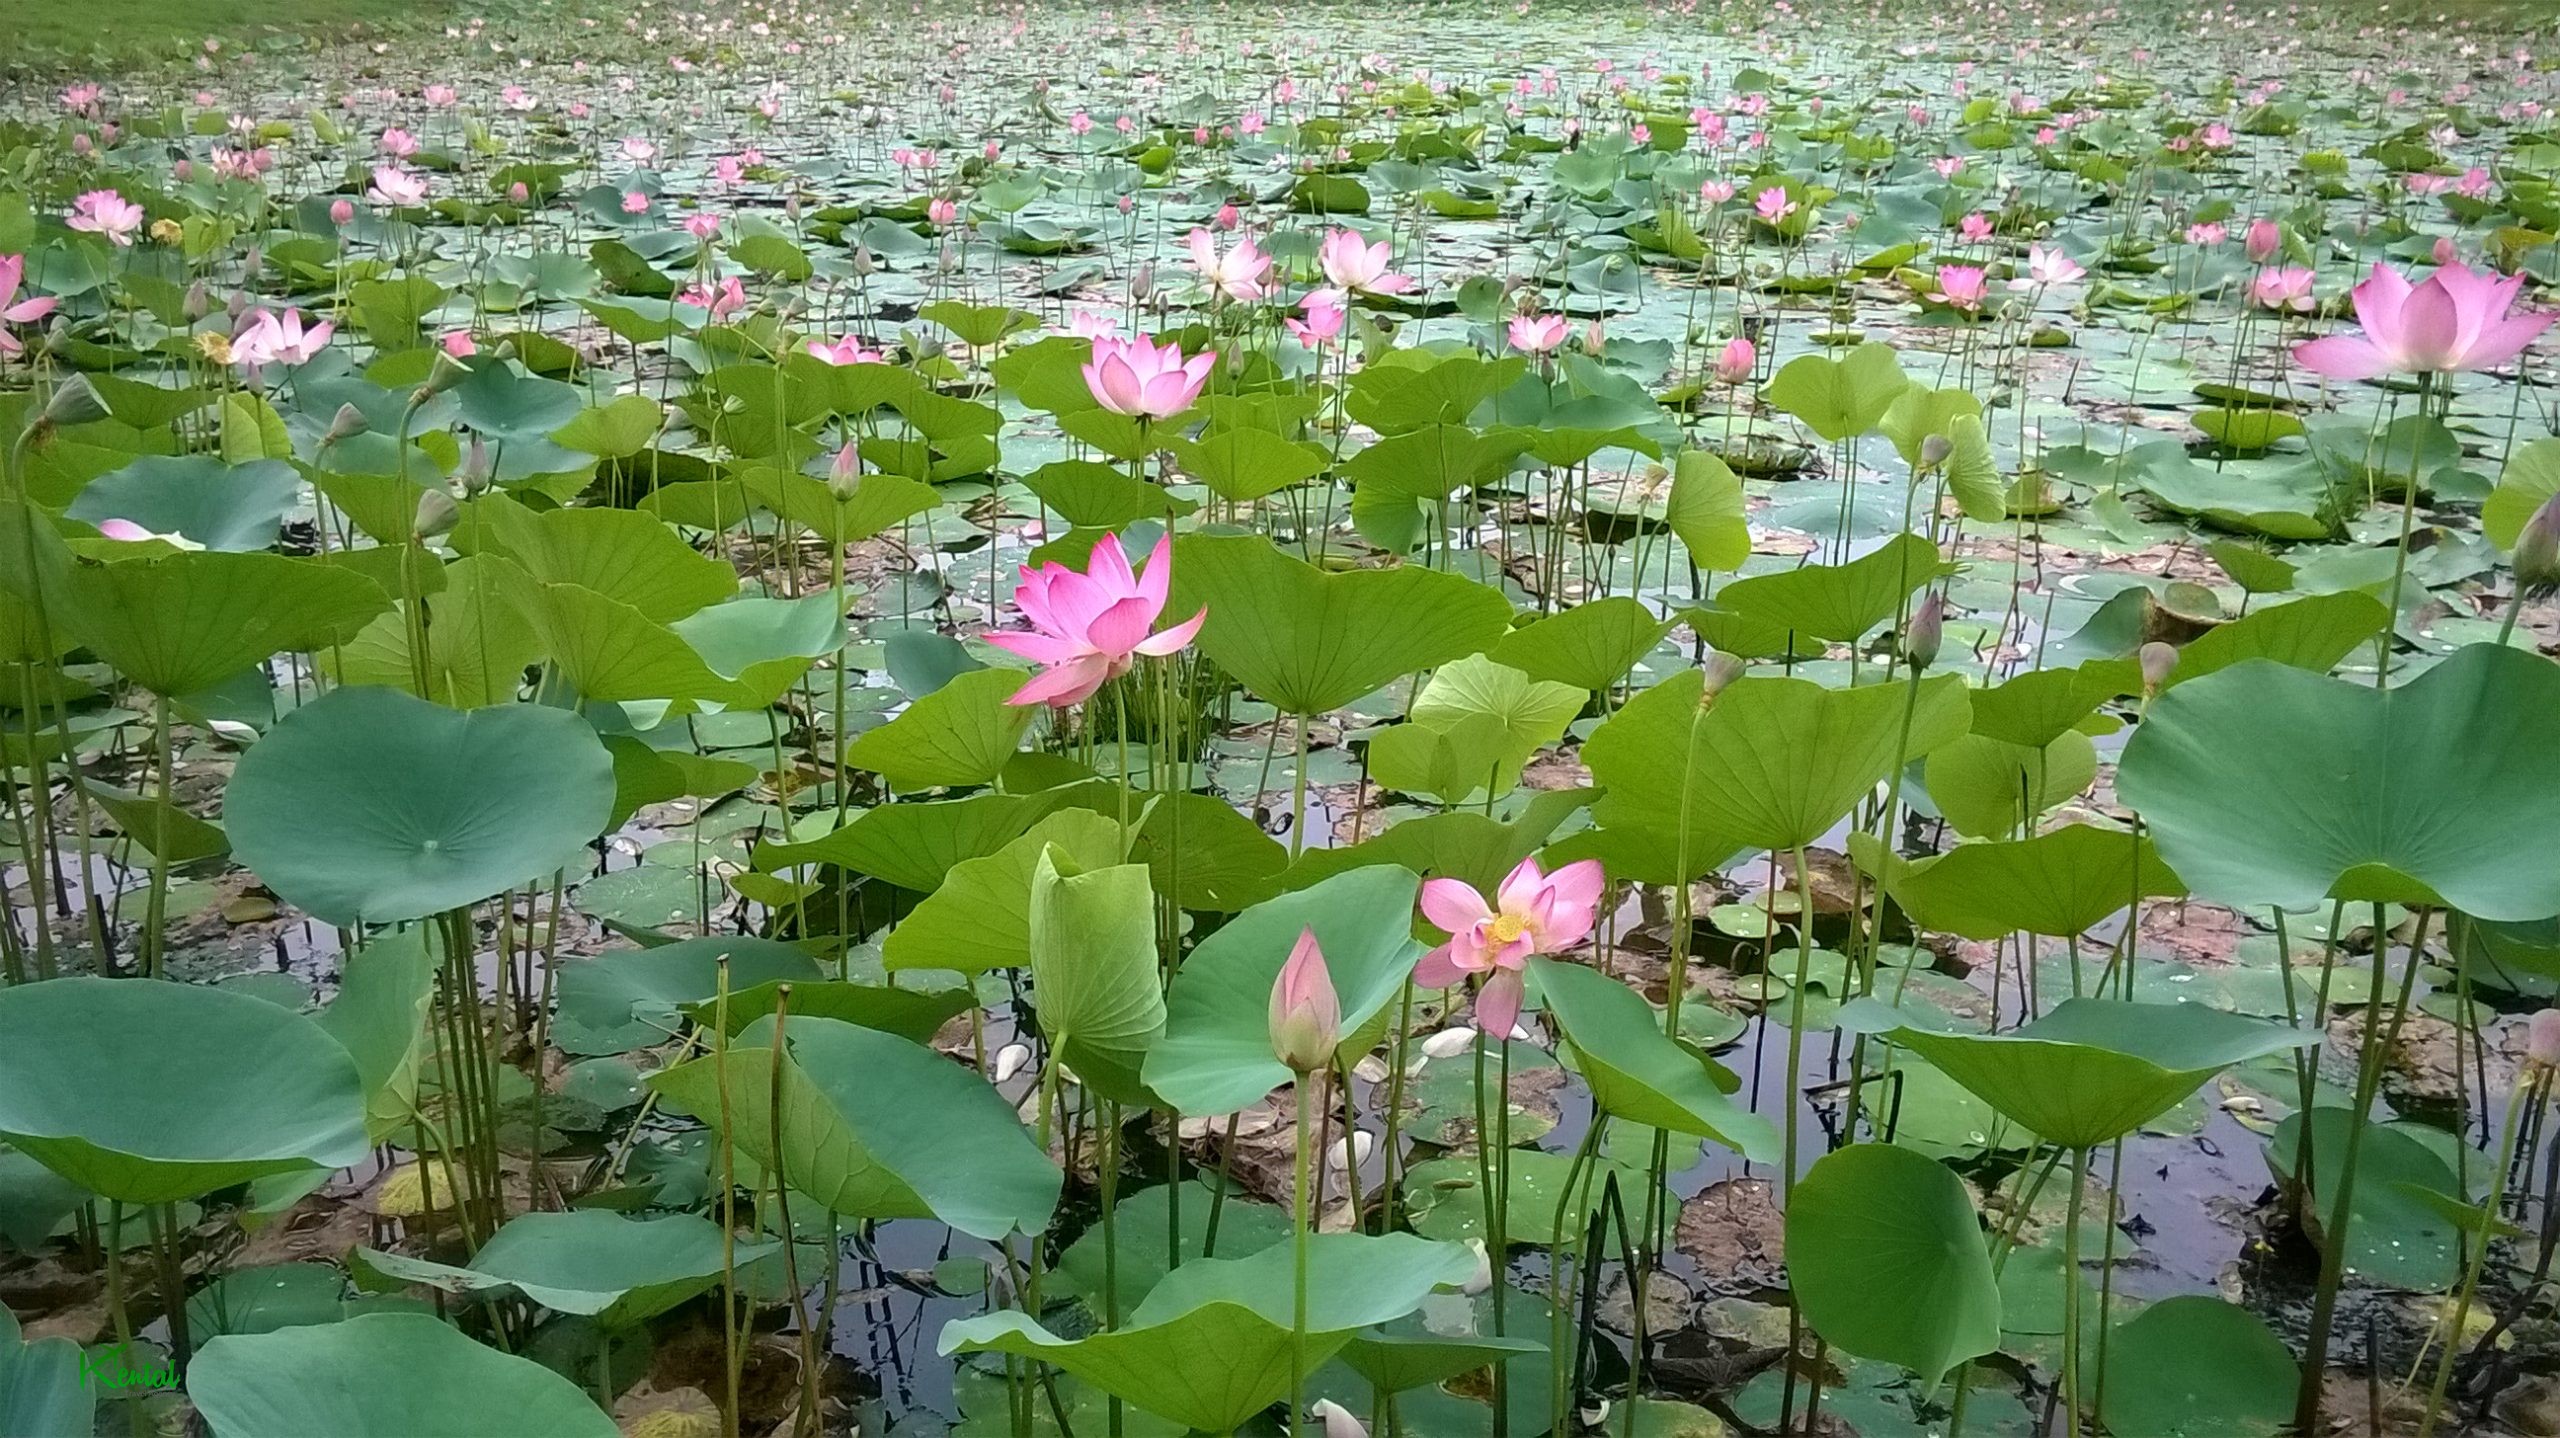 Registration of Lily Pond in the list of national monuments